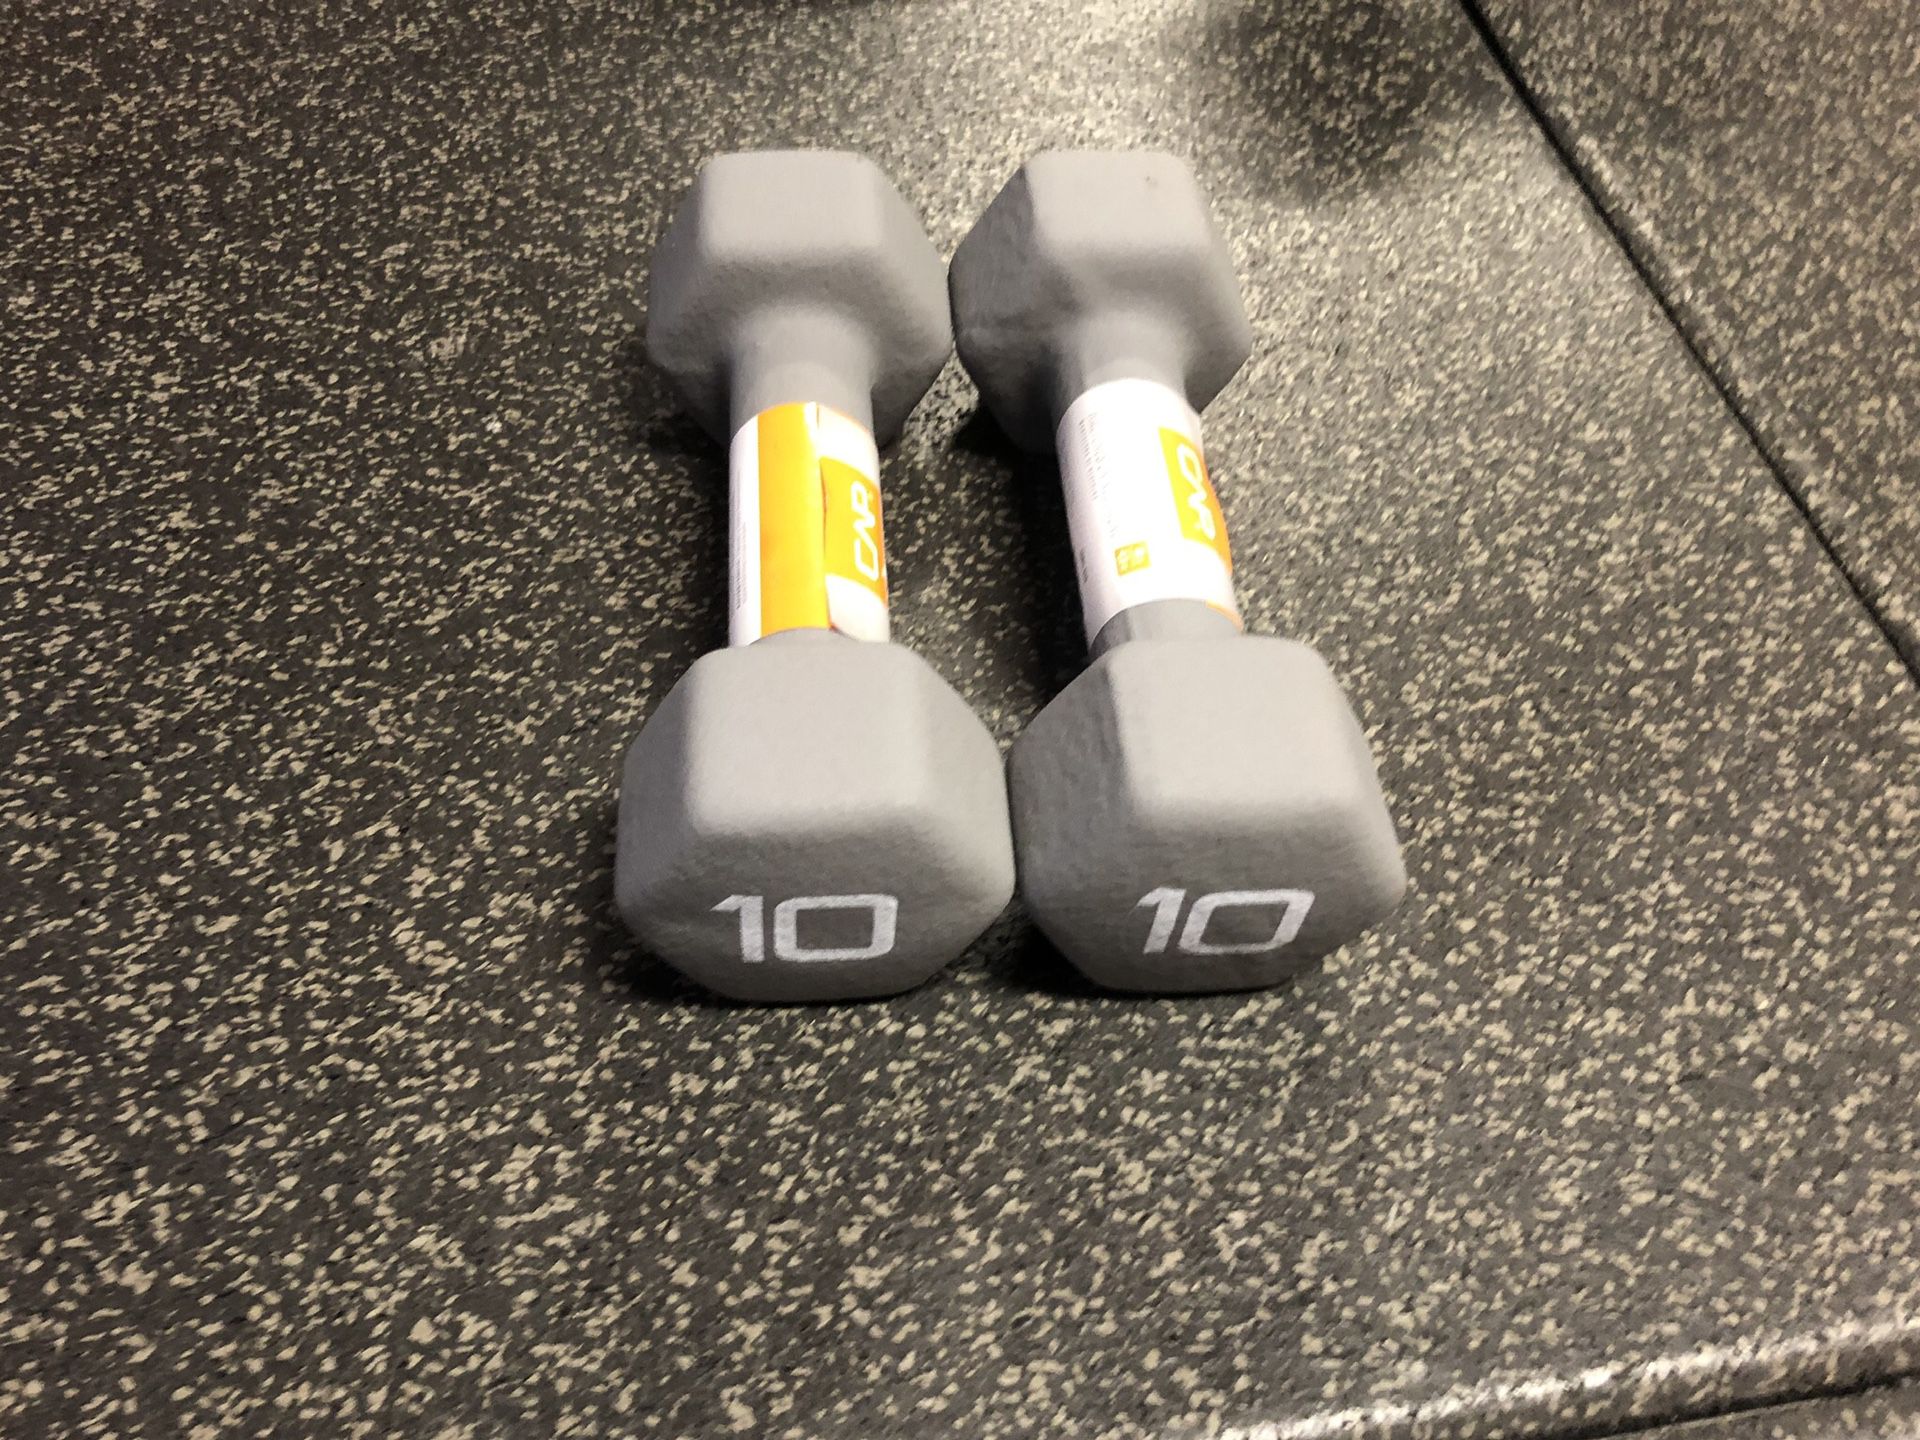 umbbells 💪🏻 Weights Set, 2x 10 lbs -Brand New!